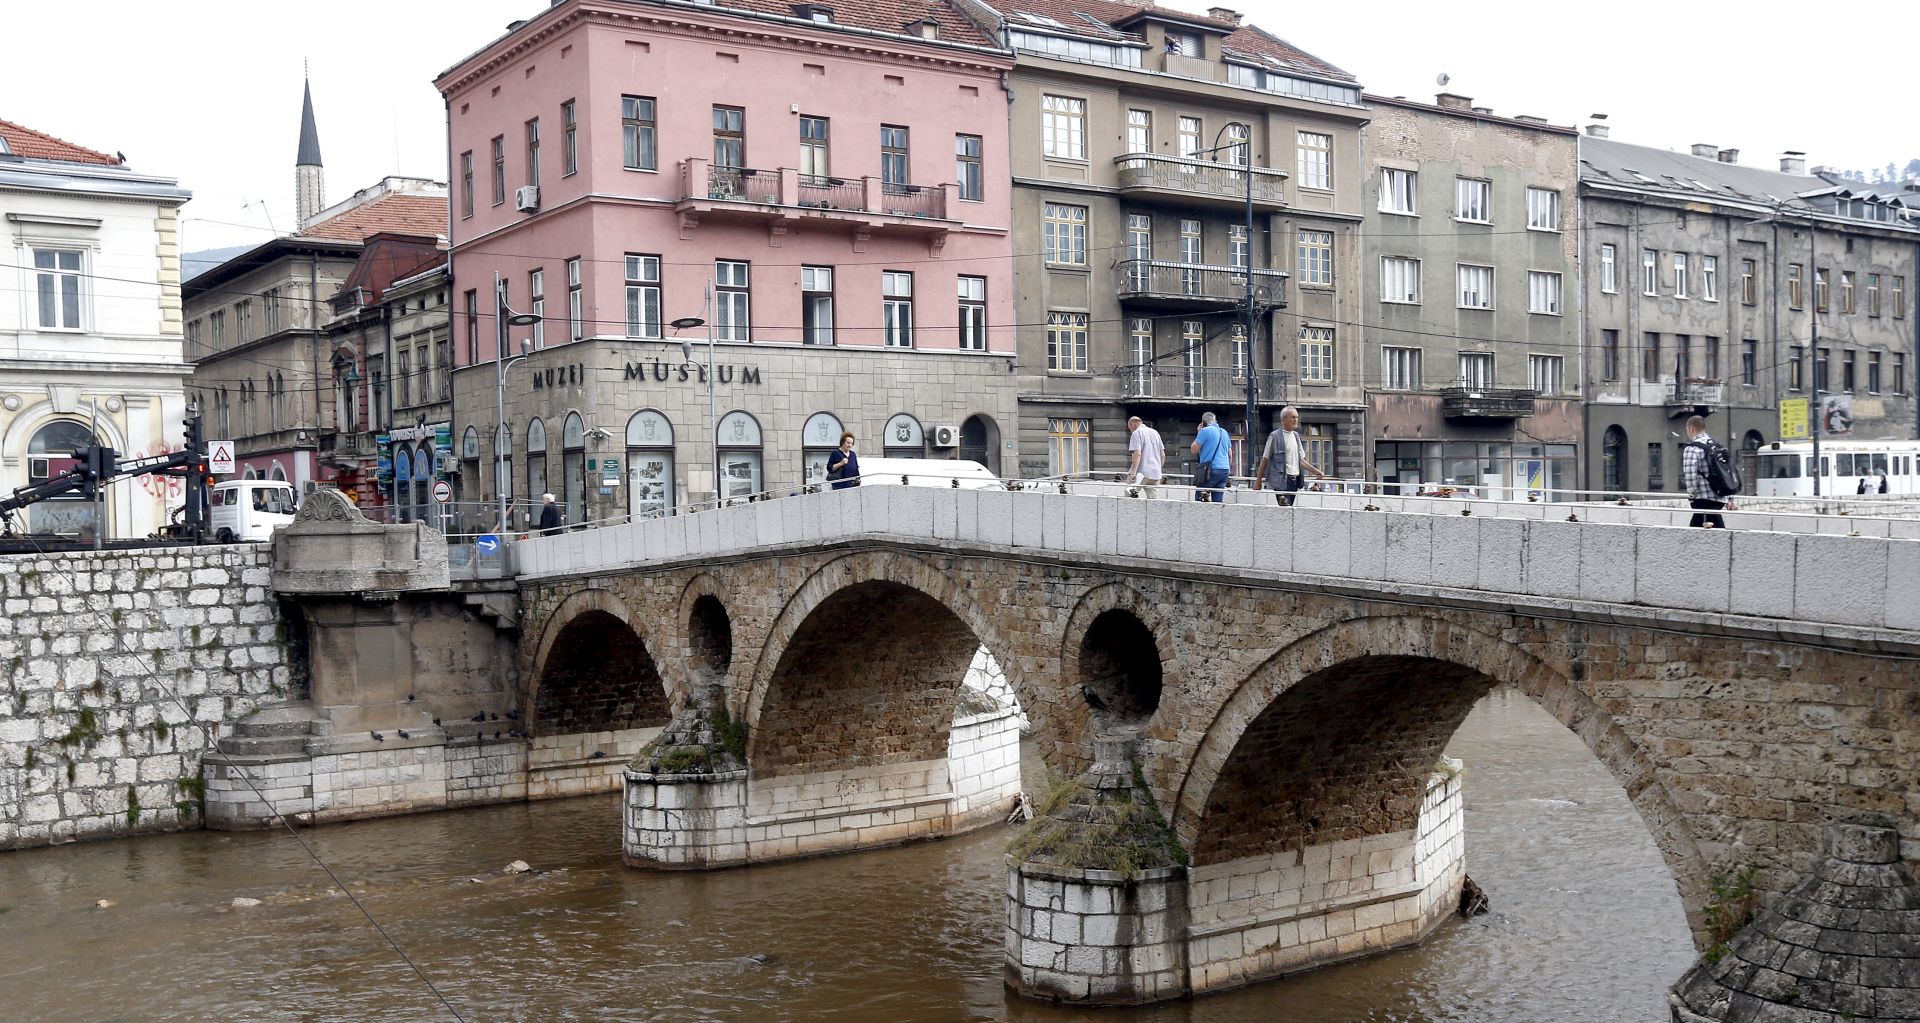 epa07679521 The Latin Bridge in Sarajevo, Bosnia and Herzegovina, 28 June 2019 where on 28 June 1914, Bosnian Serb Gavrilo Princip killed the Austrian Archduke Franz Ferdinand, the successor of the Austro-Hungarian throne, and his wife Sophie, the Duchess of Hohenberg. It is believed that the assassination initiated the proclamation of the war of Austro-Hungary against Serbia and the beginning of the First World War. In Versailles, 28 June 1919, the Treaty of Versailles was signed, for the end of the First World War. During the First World War according to official statistics, cost more than 37 million military and civilian victims in the period from 1914 to 1918.  EPA/FEHIM DEMIR